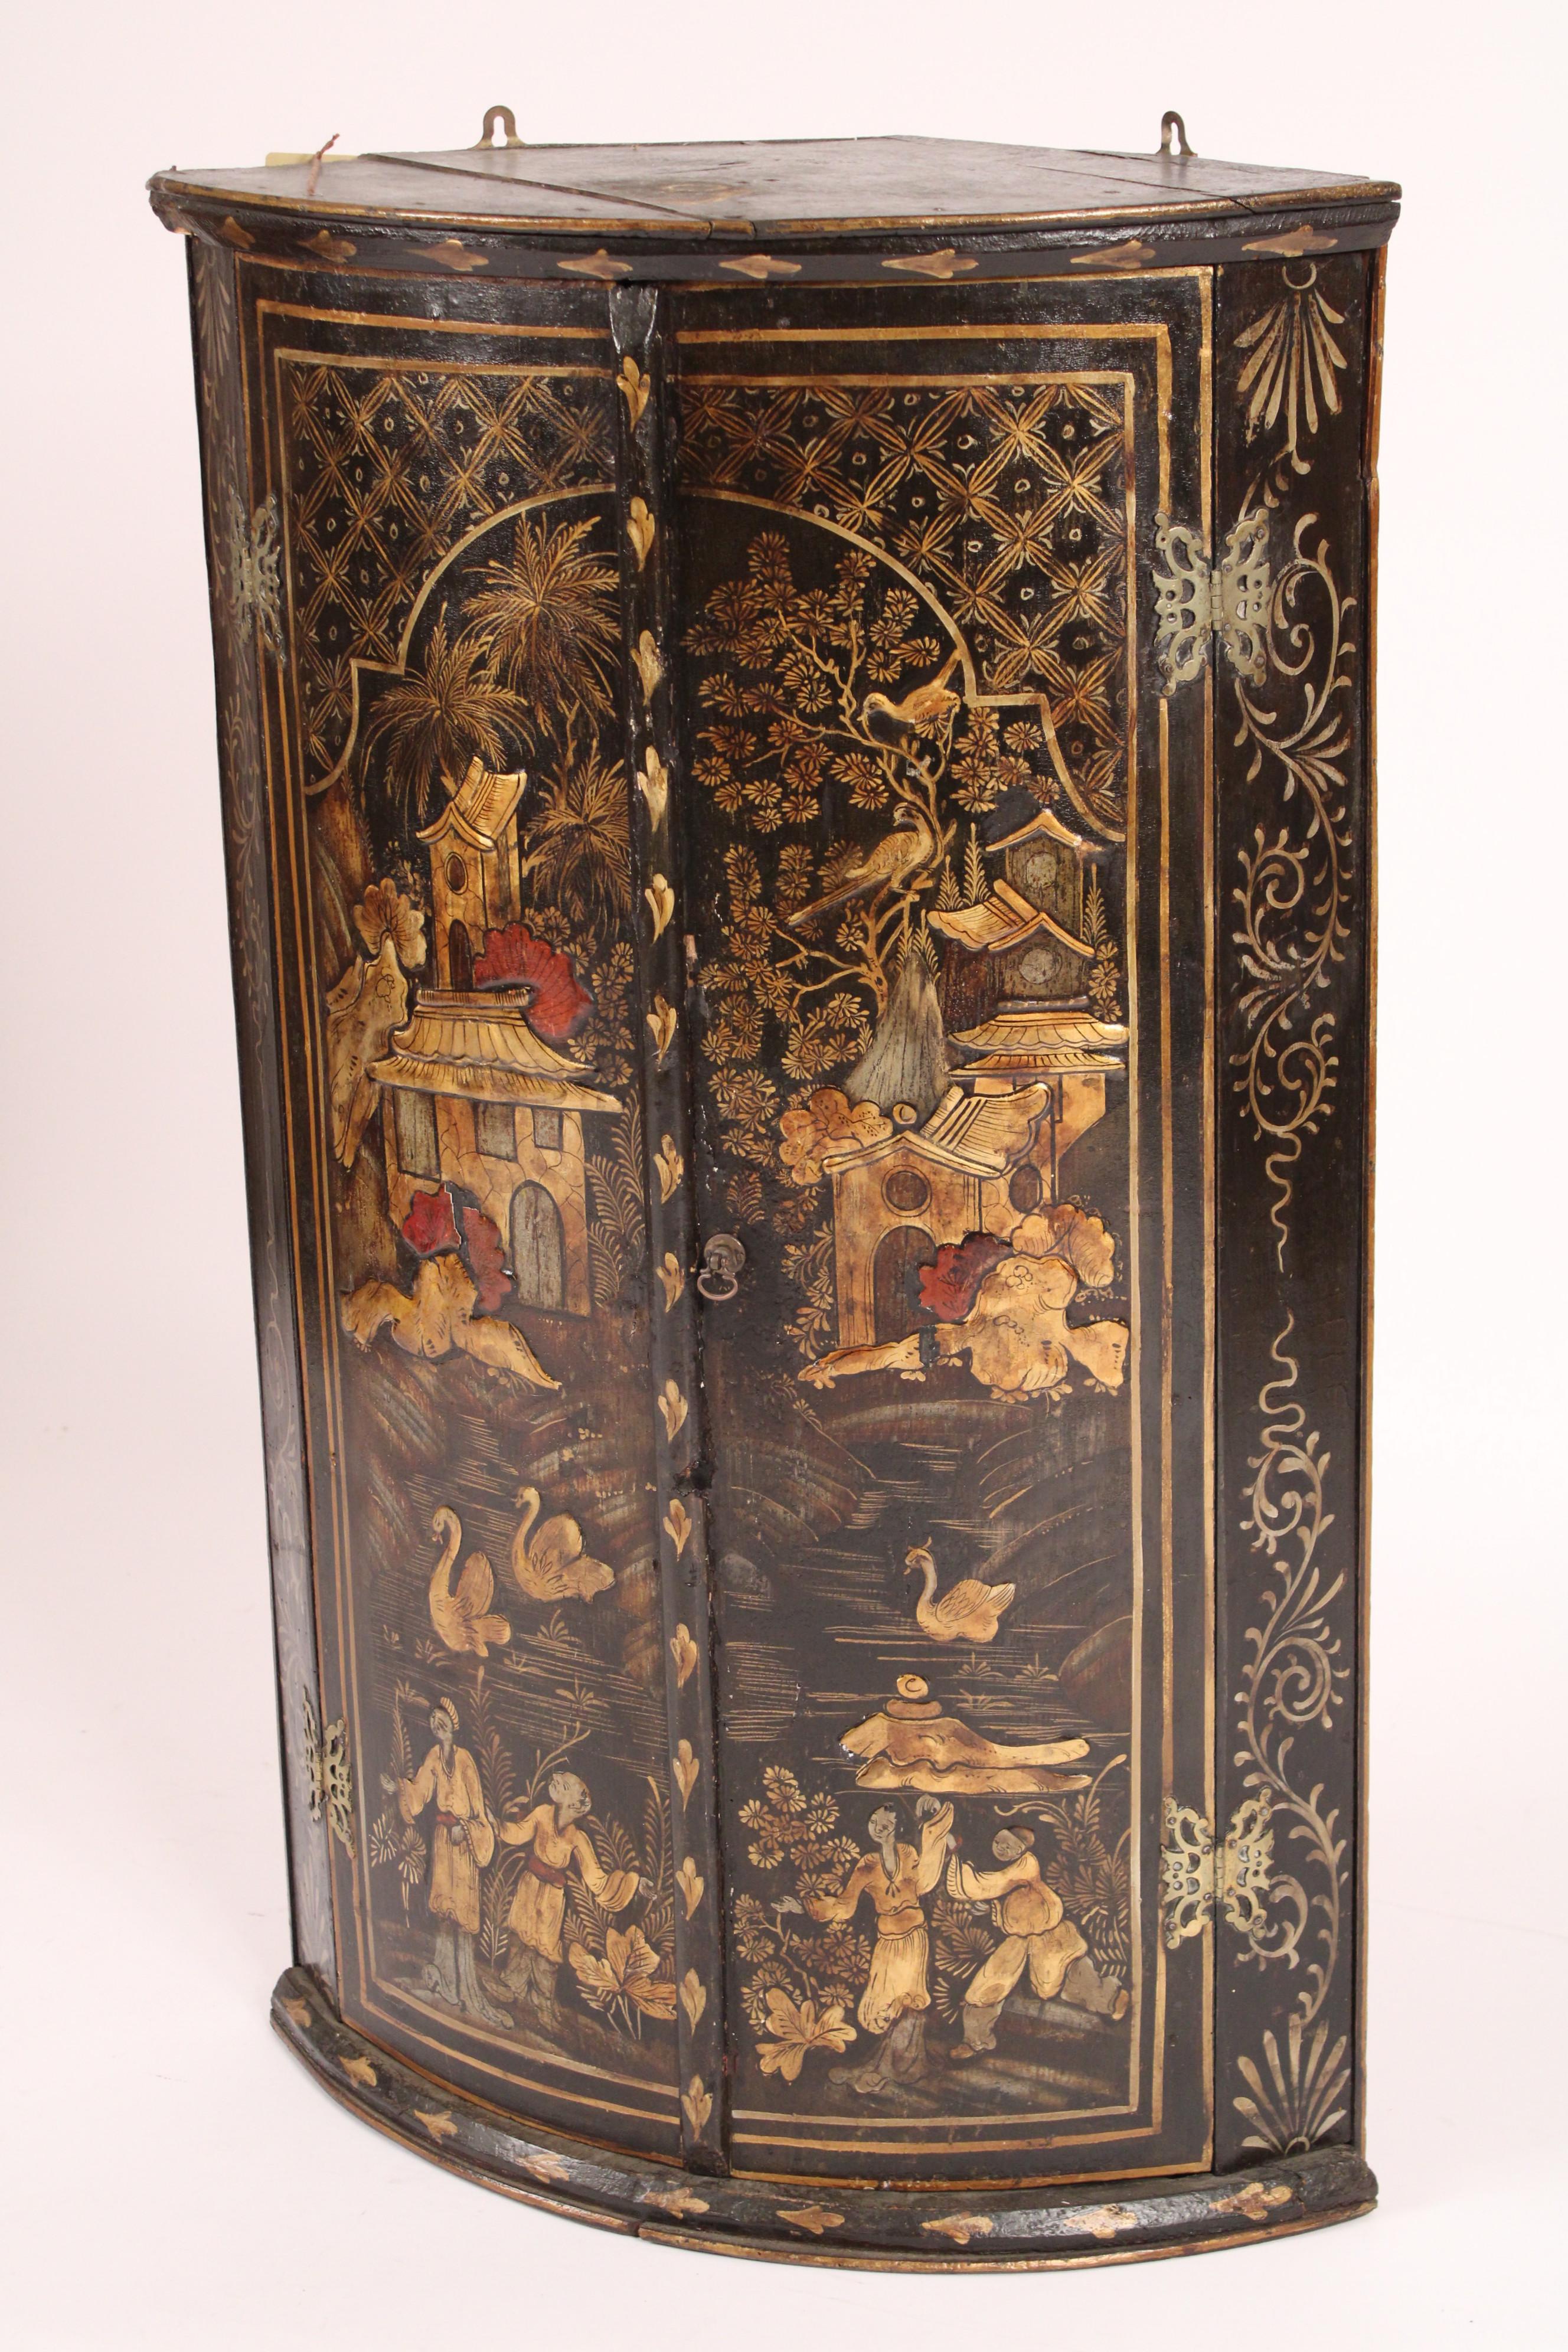 George III chinoiserie decorated hanging corner cabinet, late 18th century. The two doors decorated with Chinese figures, tea houses, swans and birds. The chinoiserie decoration is raised, not flat.